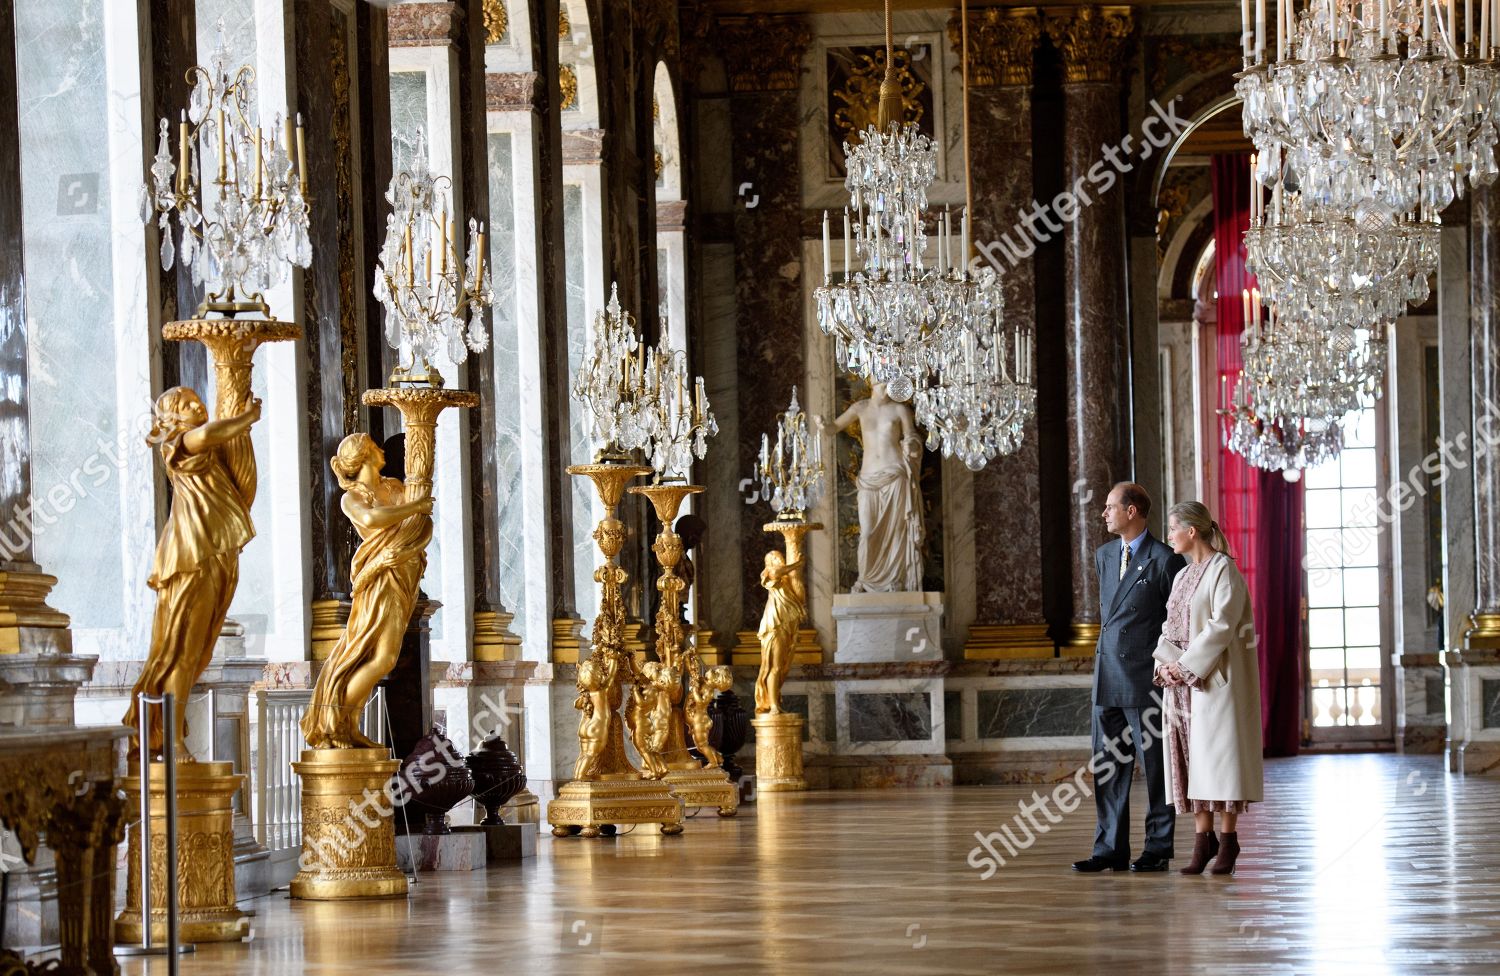 prince-edward-and-sophie-countess-of-wessex-visit-to-france-shutterstock-editorial-9907868bq.jpg